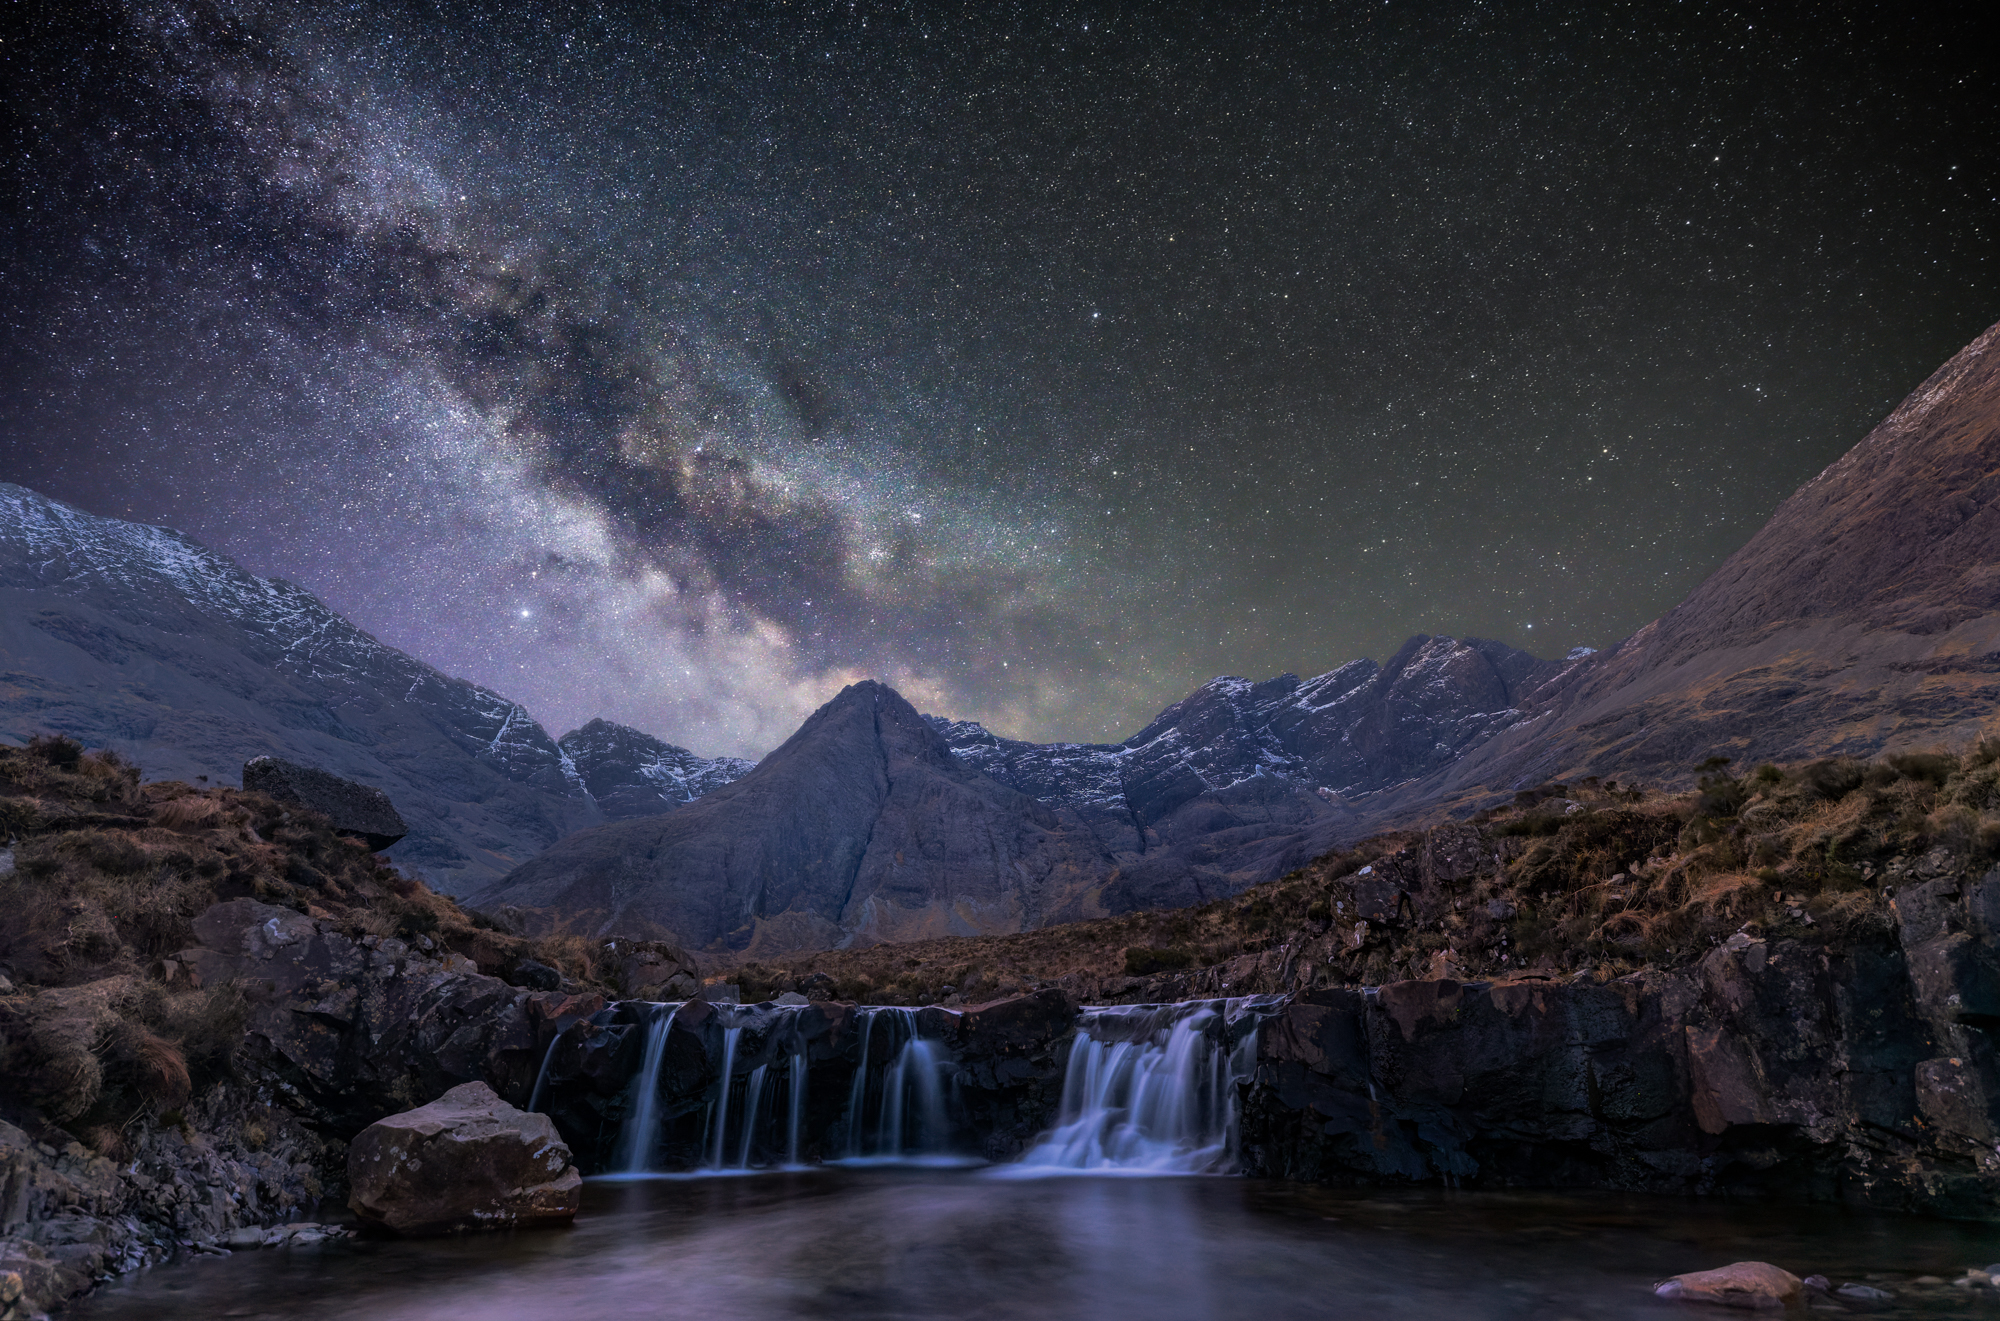 1st Place, Milky Way Above The Cuillin By Dave Lynch